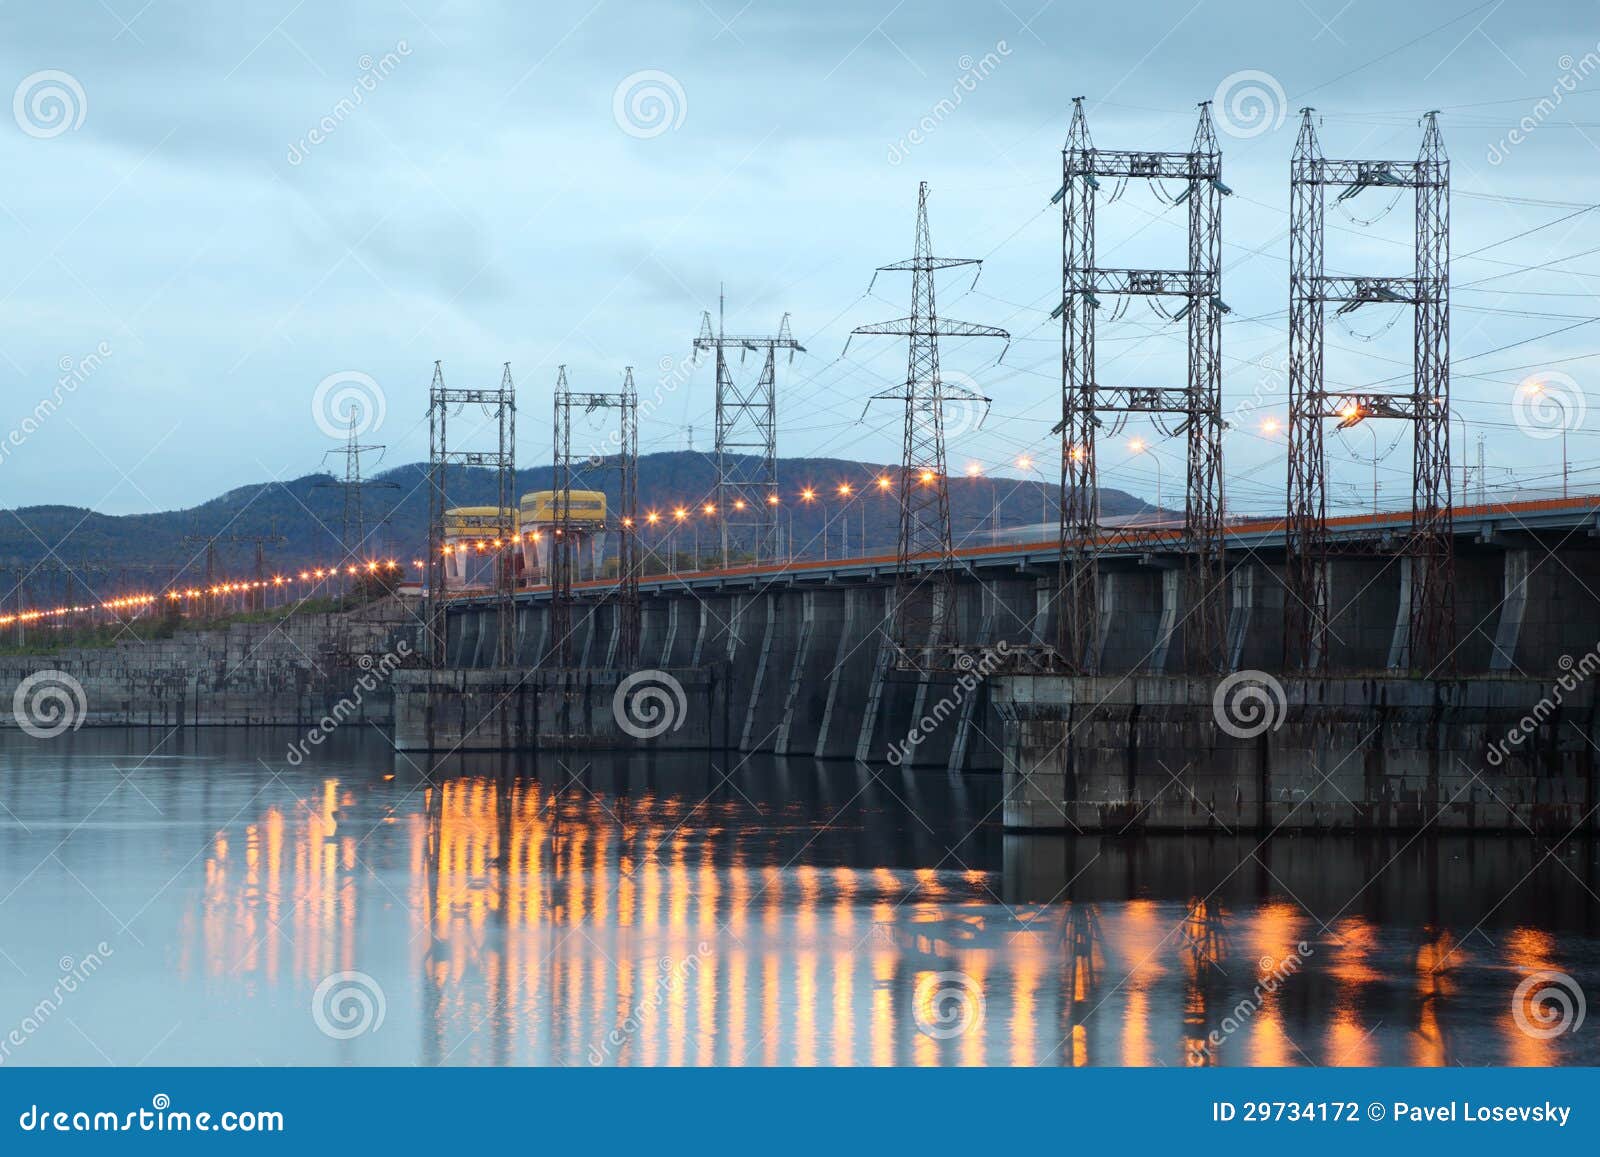 hydroelectric power station on river at evening